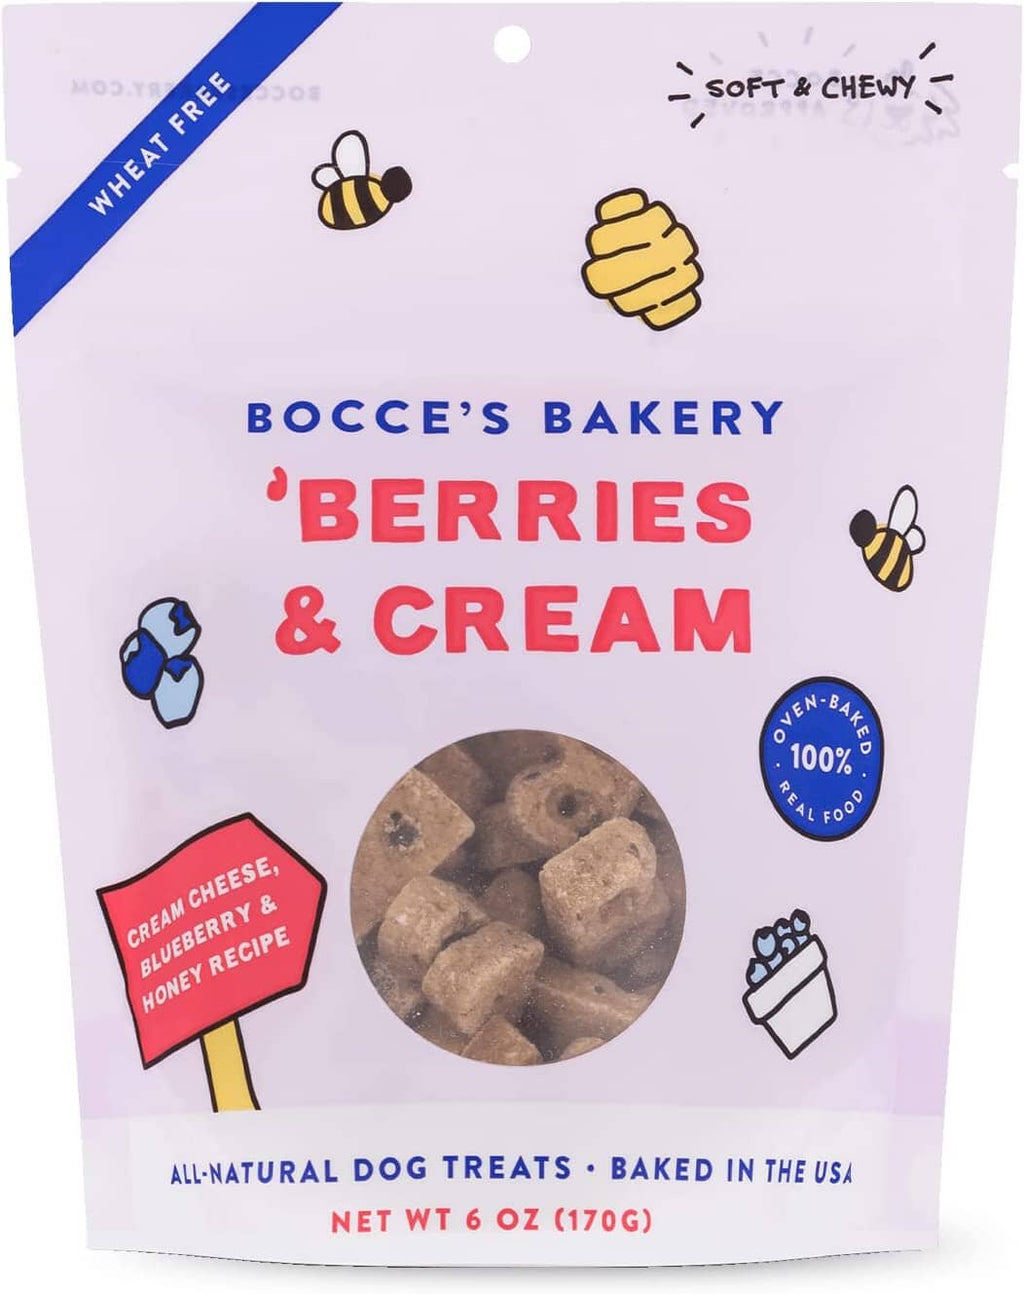 Bocce's Bakery Berries and Cream Soft and Chewy Dog Treats - 5 Oz  